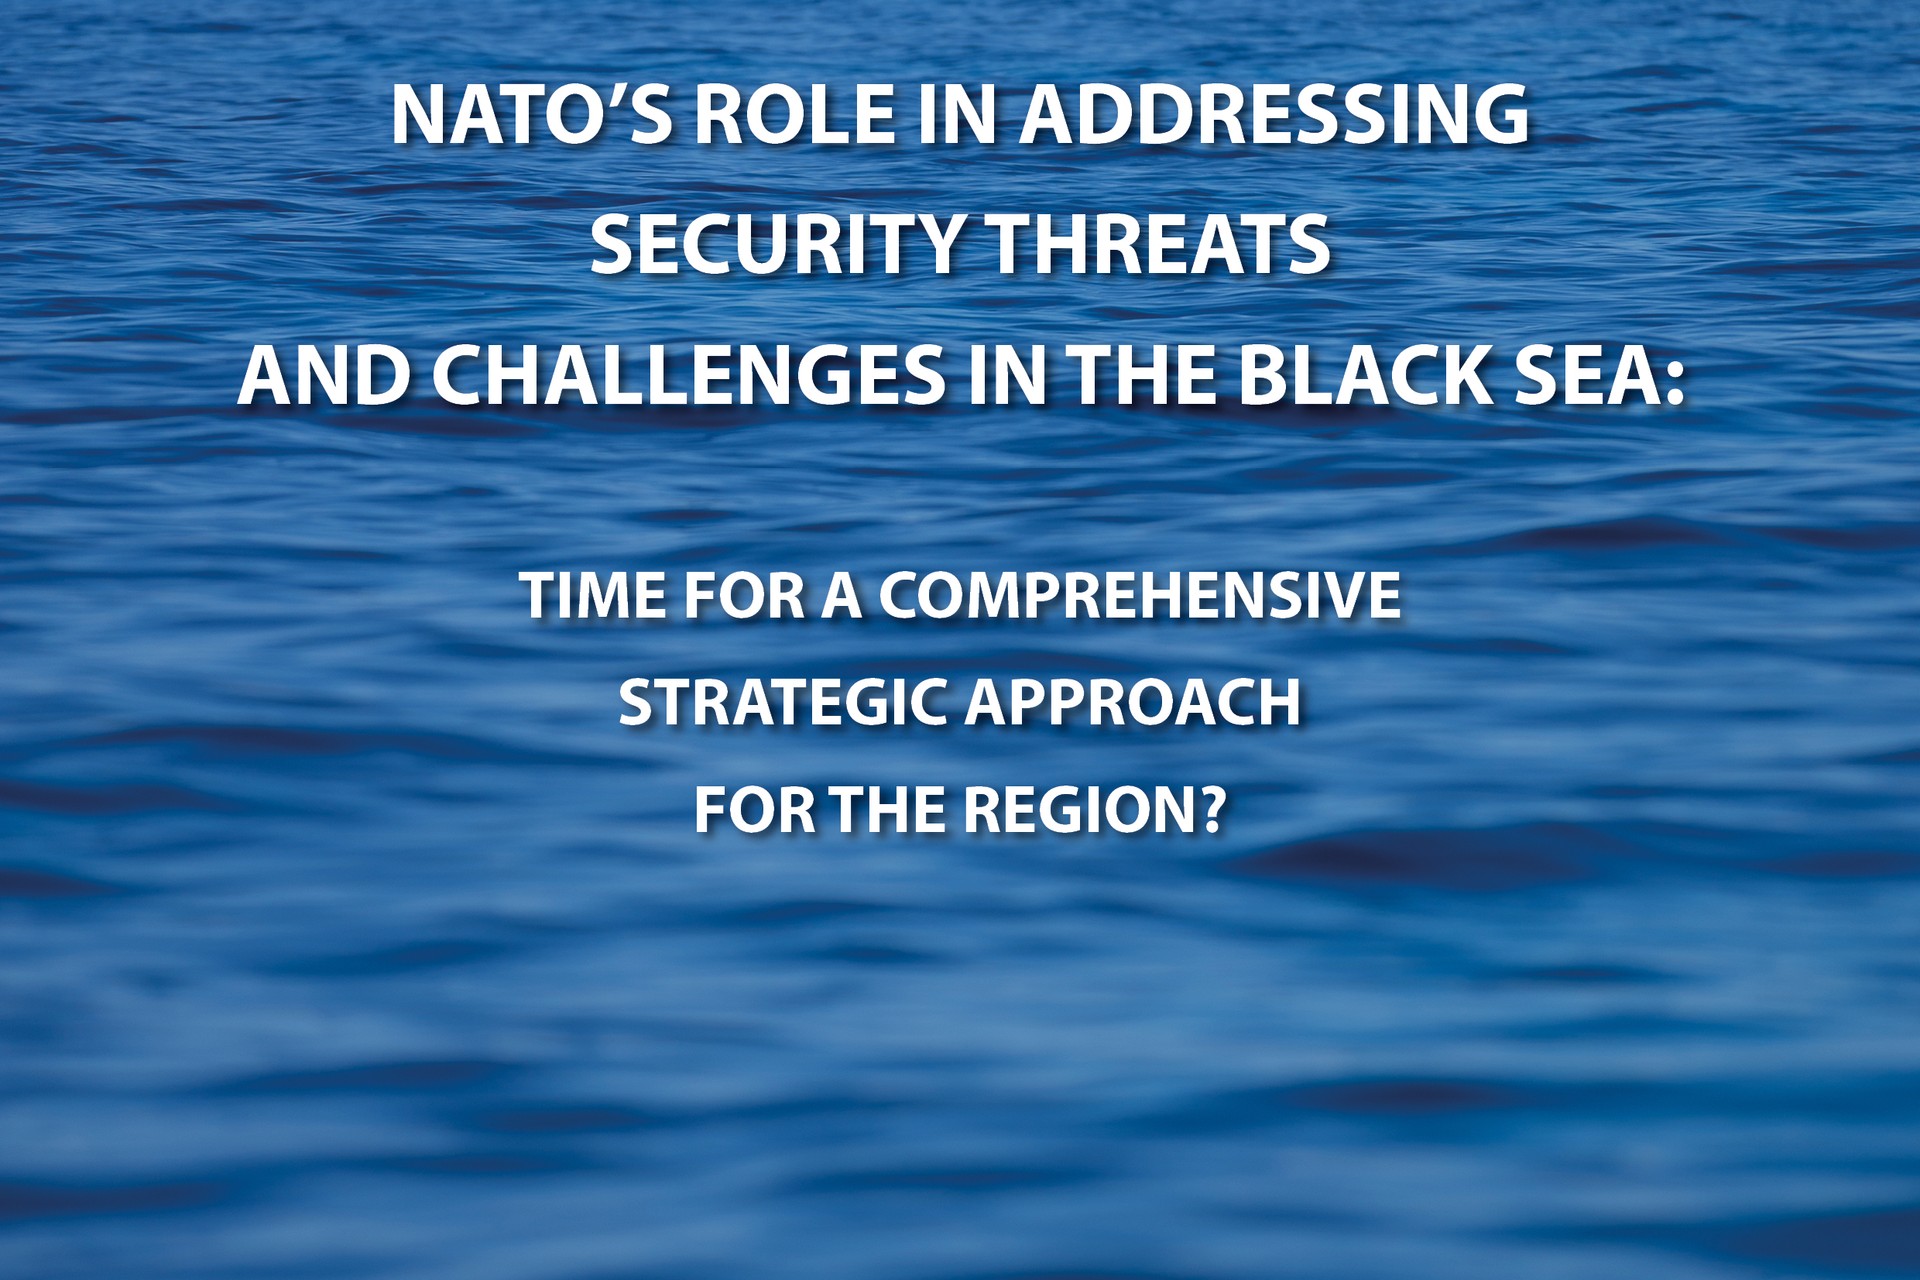 NATO'S ROLE IN ADDRESSING SECURITY THREATS AND CHALLENGES IN THE BLACK SEA